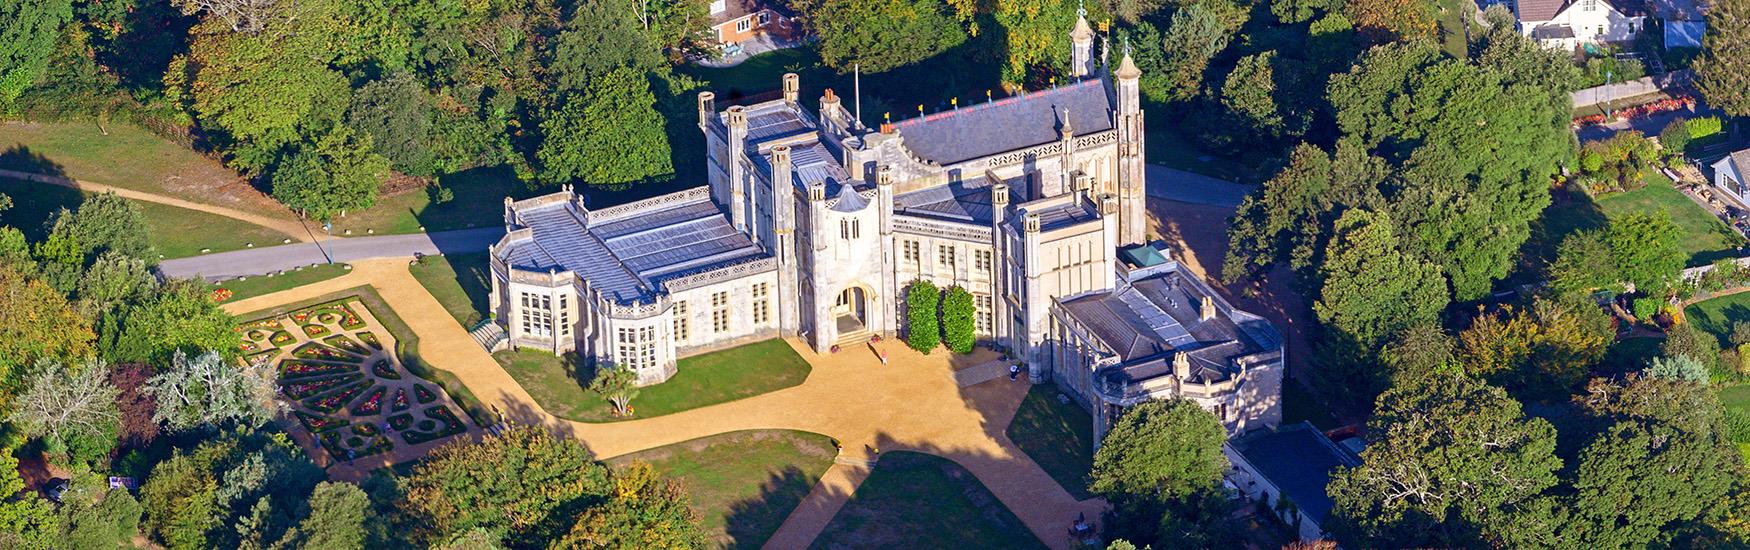 Stunning aerial shot of Highcliffe castle illuminated by the warm sun